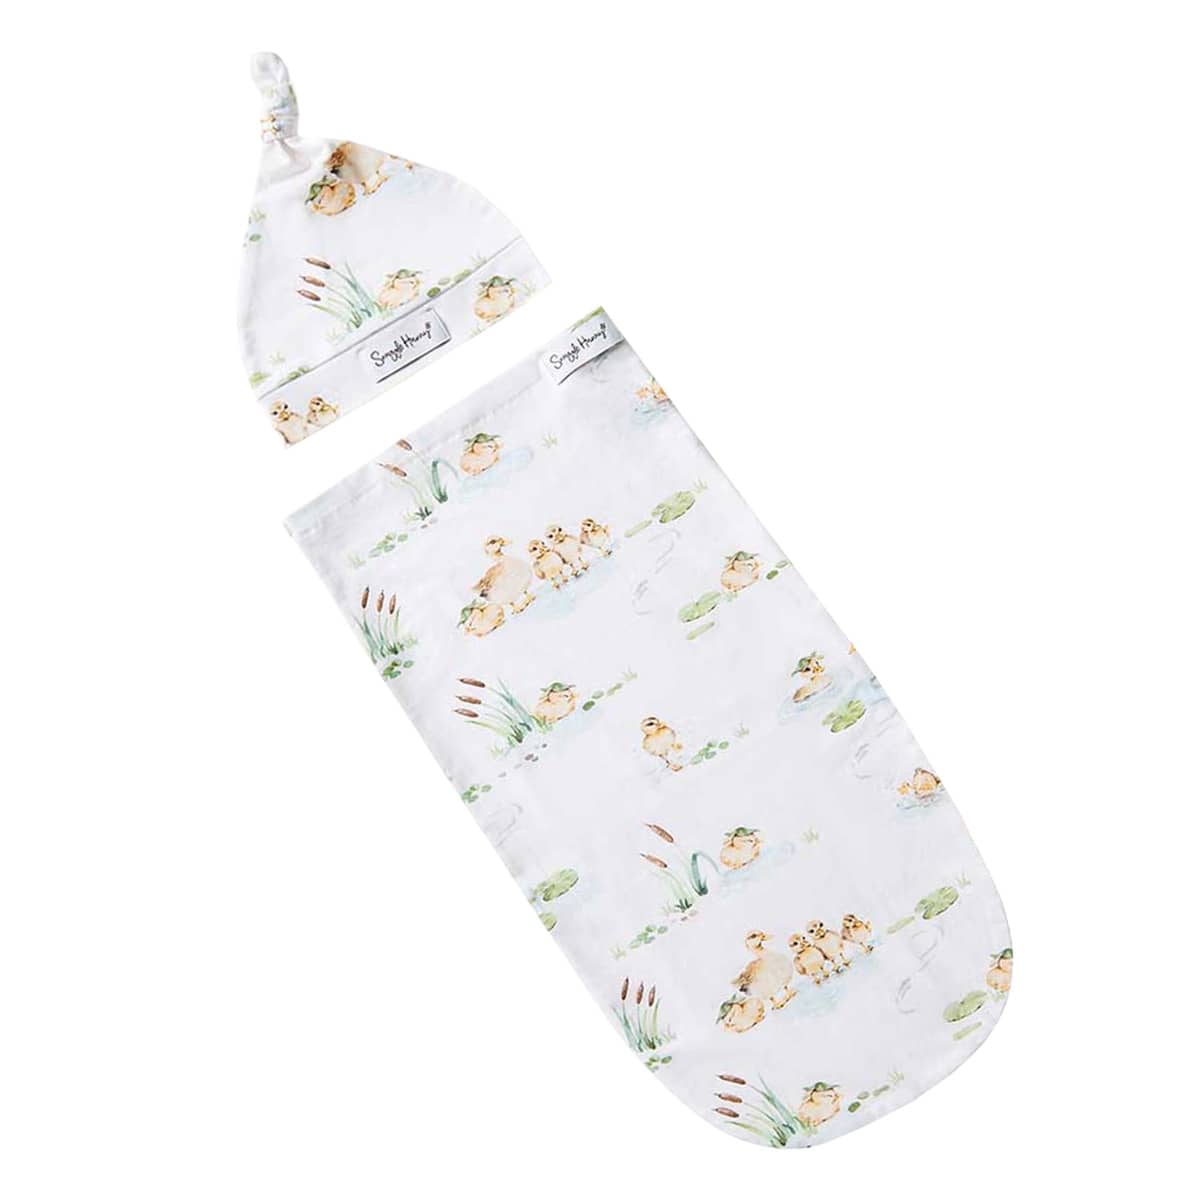 Snuggle Hunny Snuggle Swaddle Sack with Matching Headwear - Duck Pond